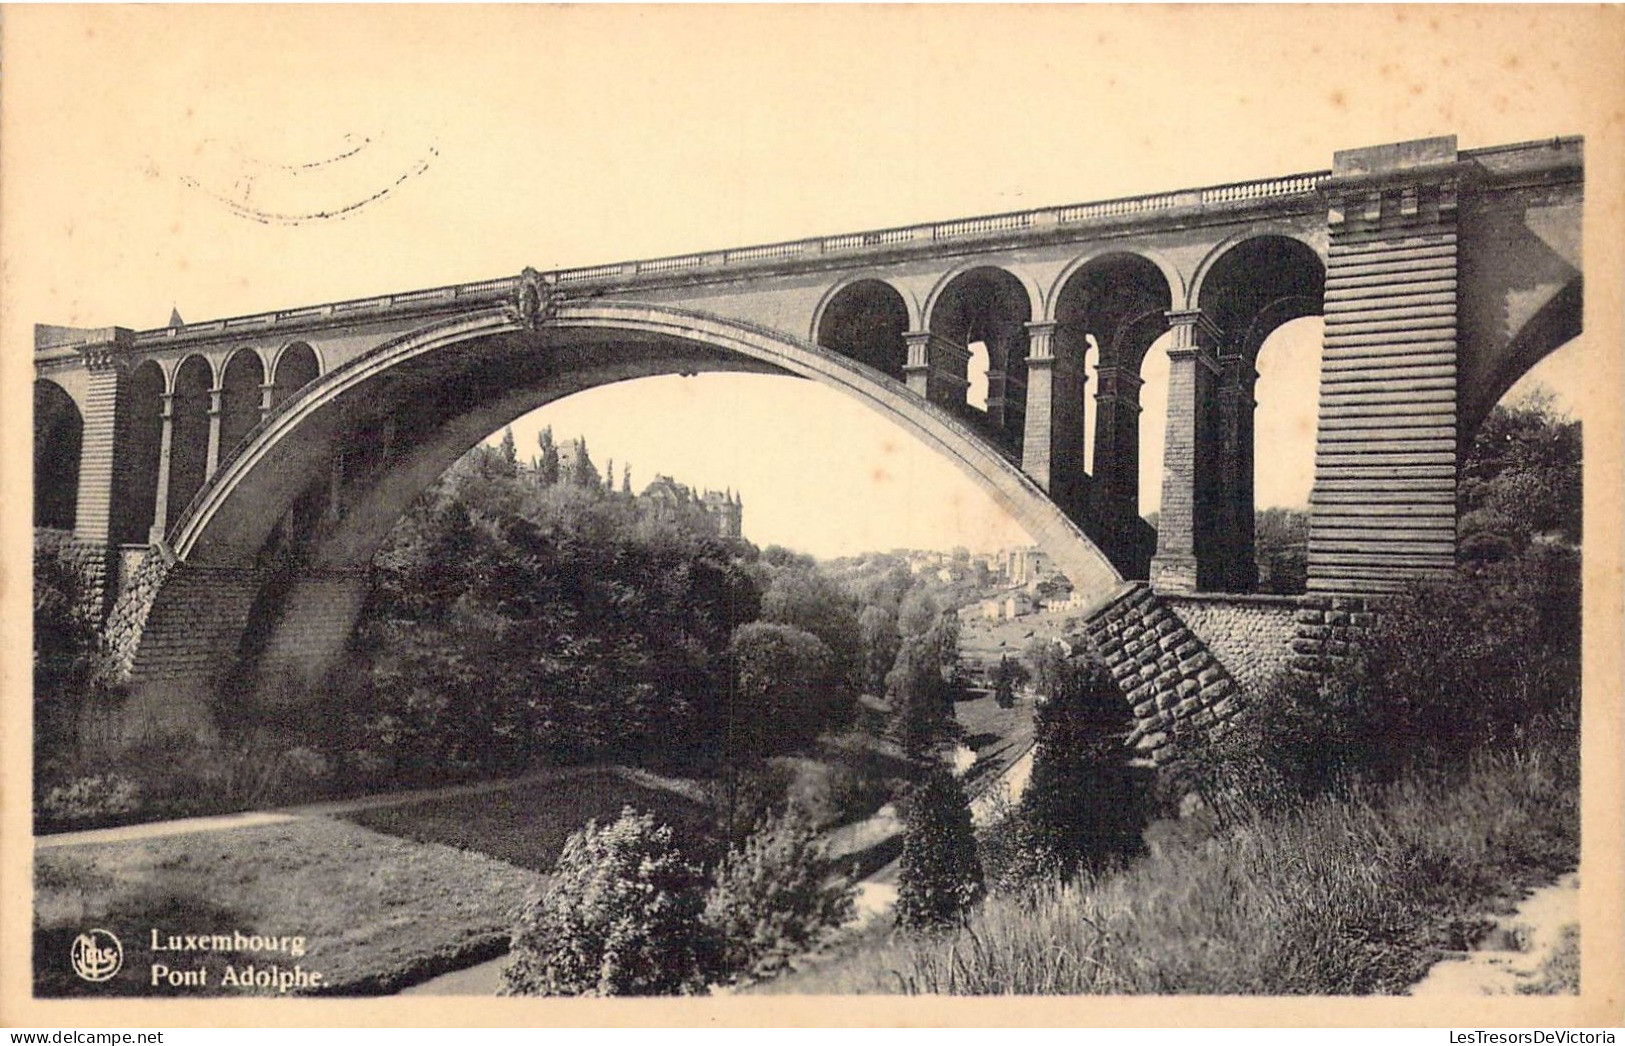 LUXEMBOURG - Ville - Pont Adolphe - Carte Postale Ancienne - Luxemburg - Town